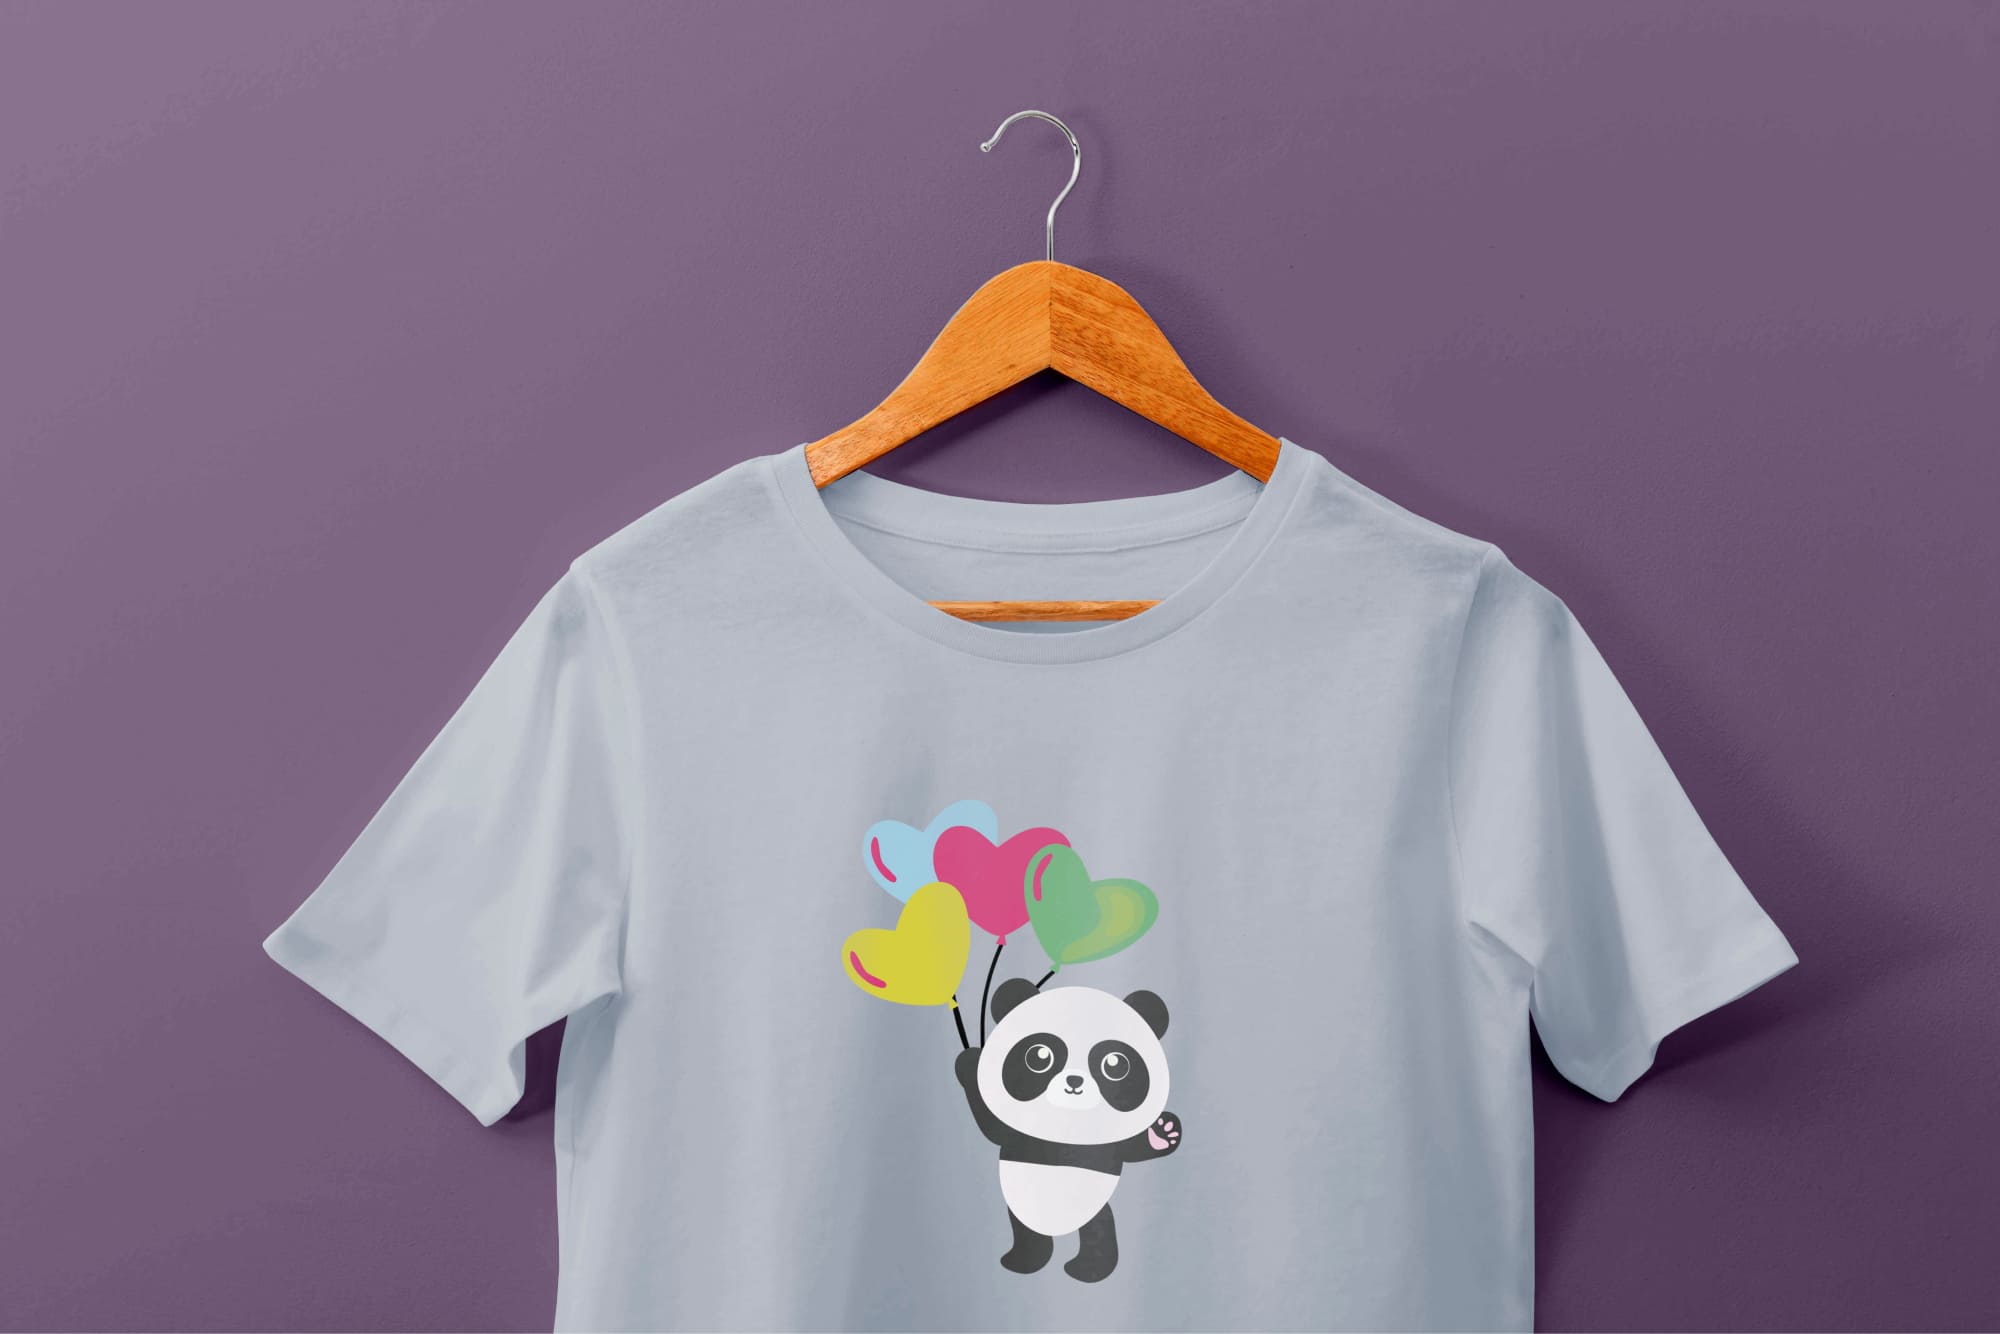 Light blue t-shirt with a panda and 4 balloon hearts on a hanger on a purple background.